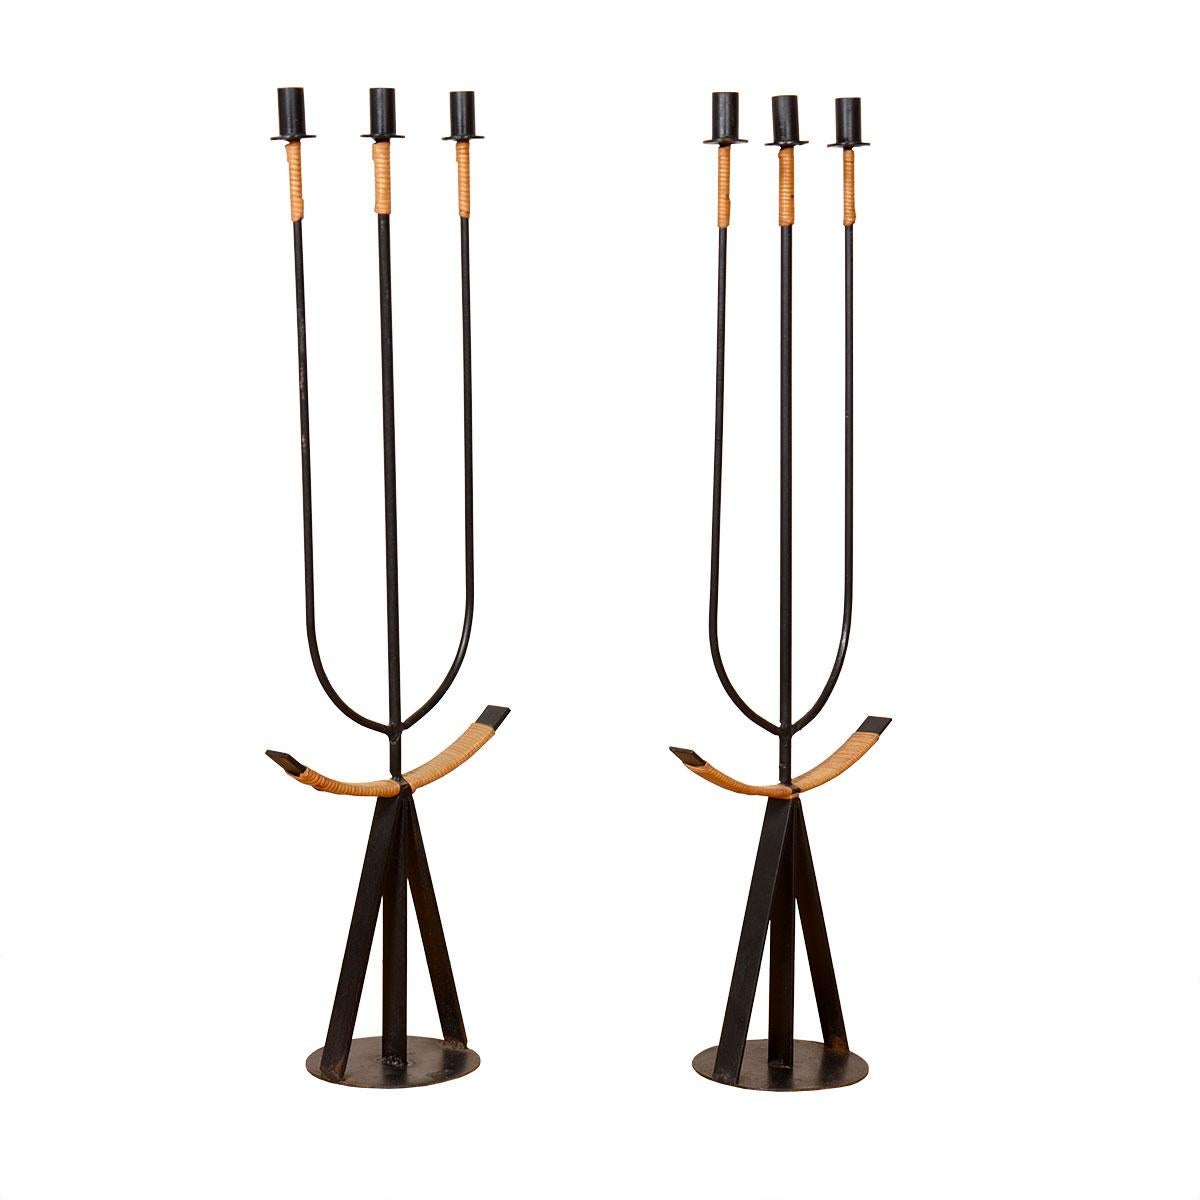 Pair of Wrought Iron candelabra with rattan detailing. Iconic design by Arthur Umanoff from the 1950s. 3 tall, elongated stems have a wrapping of rattan at the neck just below the candleholder. 3 stem base on a circular foundation with “arms”